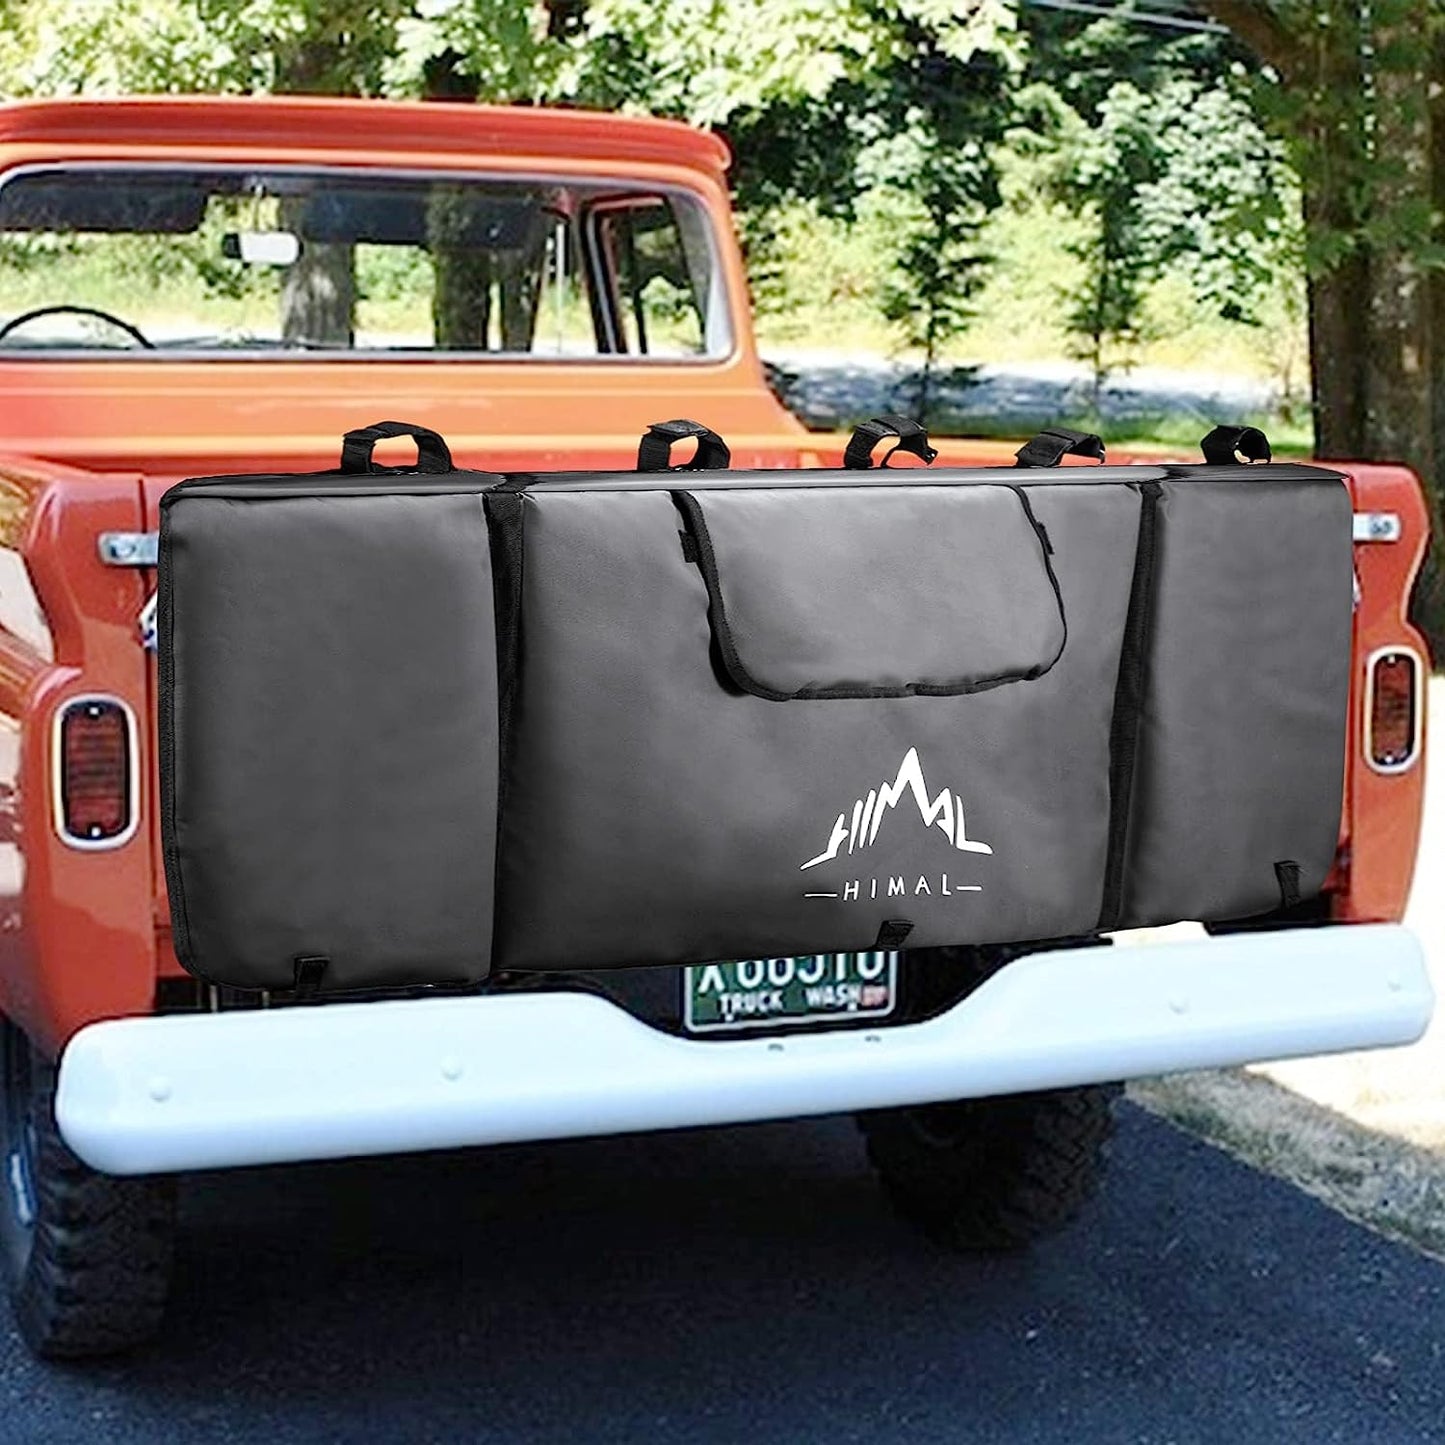 Himal Outdoors Tailgate Pad for Mountain Bike, Tailgate Protection Pad with Tool Pockets 52"